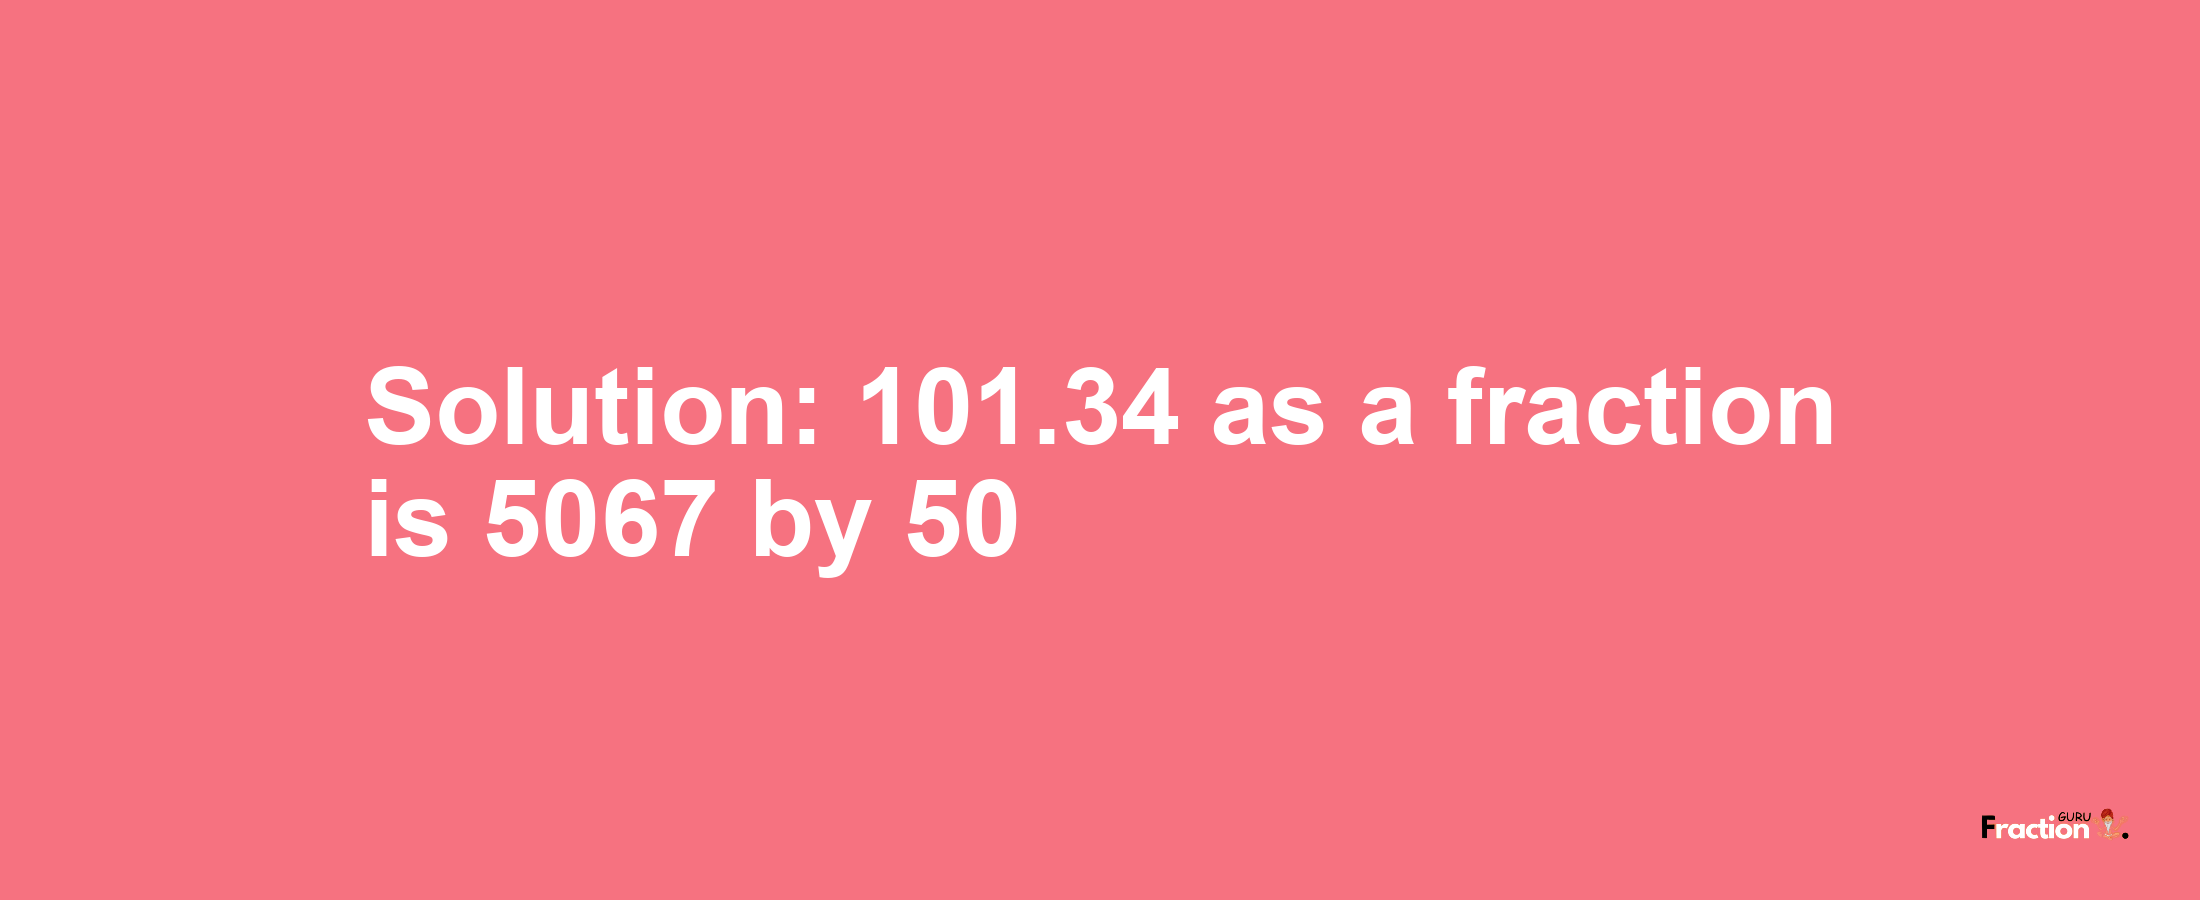 Solution:101.34 as a fraction is 5067/50